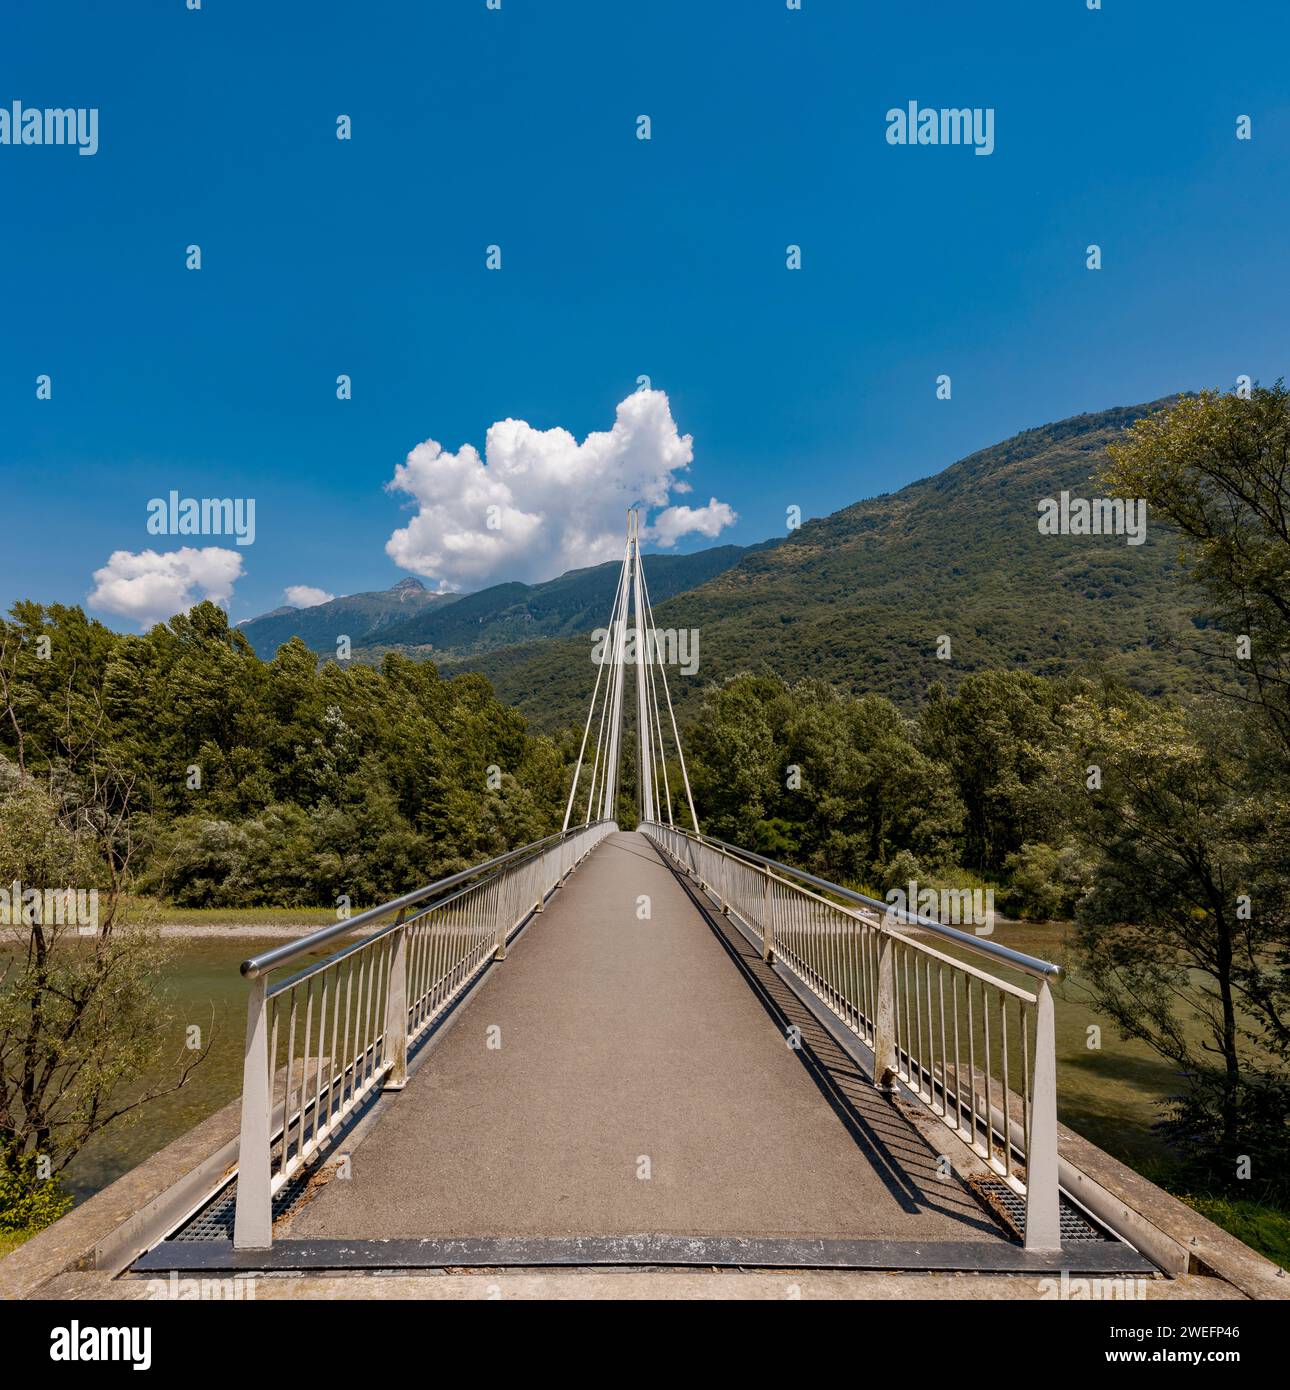 Footbridge in the middle of the forest, beautiful architecture with a large engineering firm. The object is located in Switzerland, it is a sunny day Stock Photo